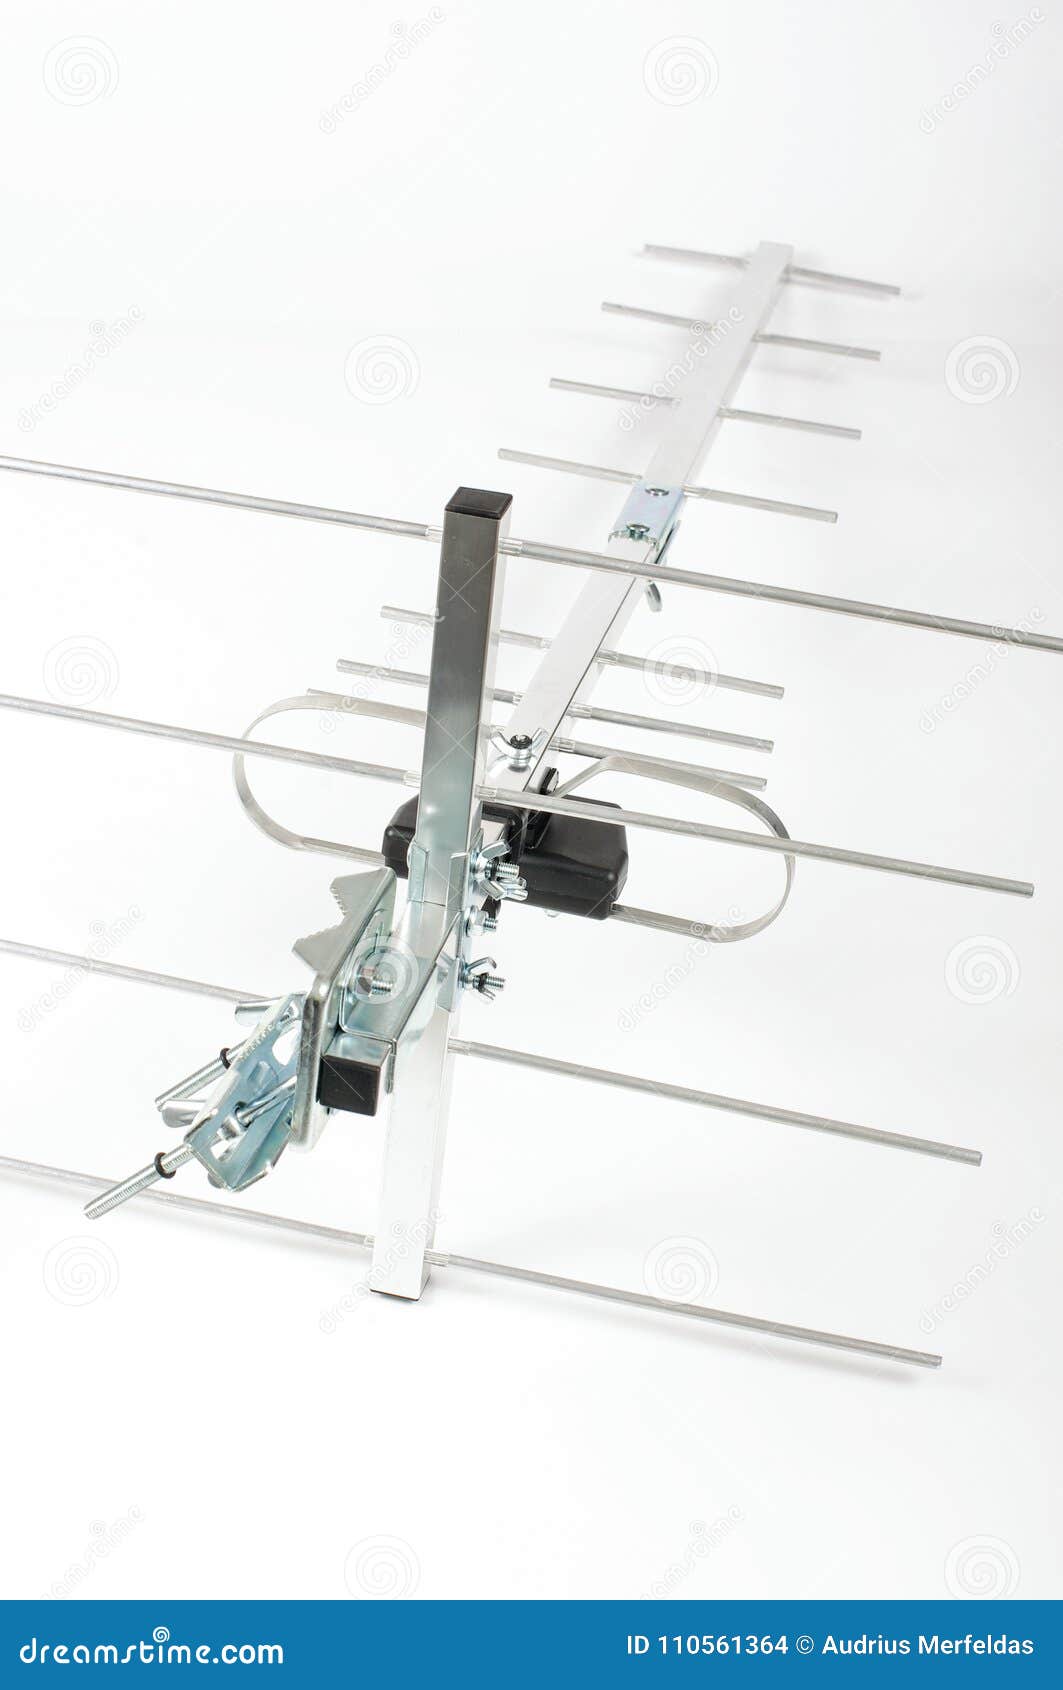 Yagi Uda Antenna for UHF Tv Isolated on the White Background Stock Photo picture picture